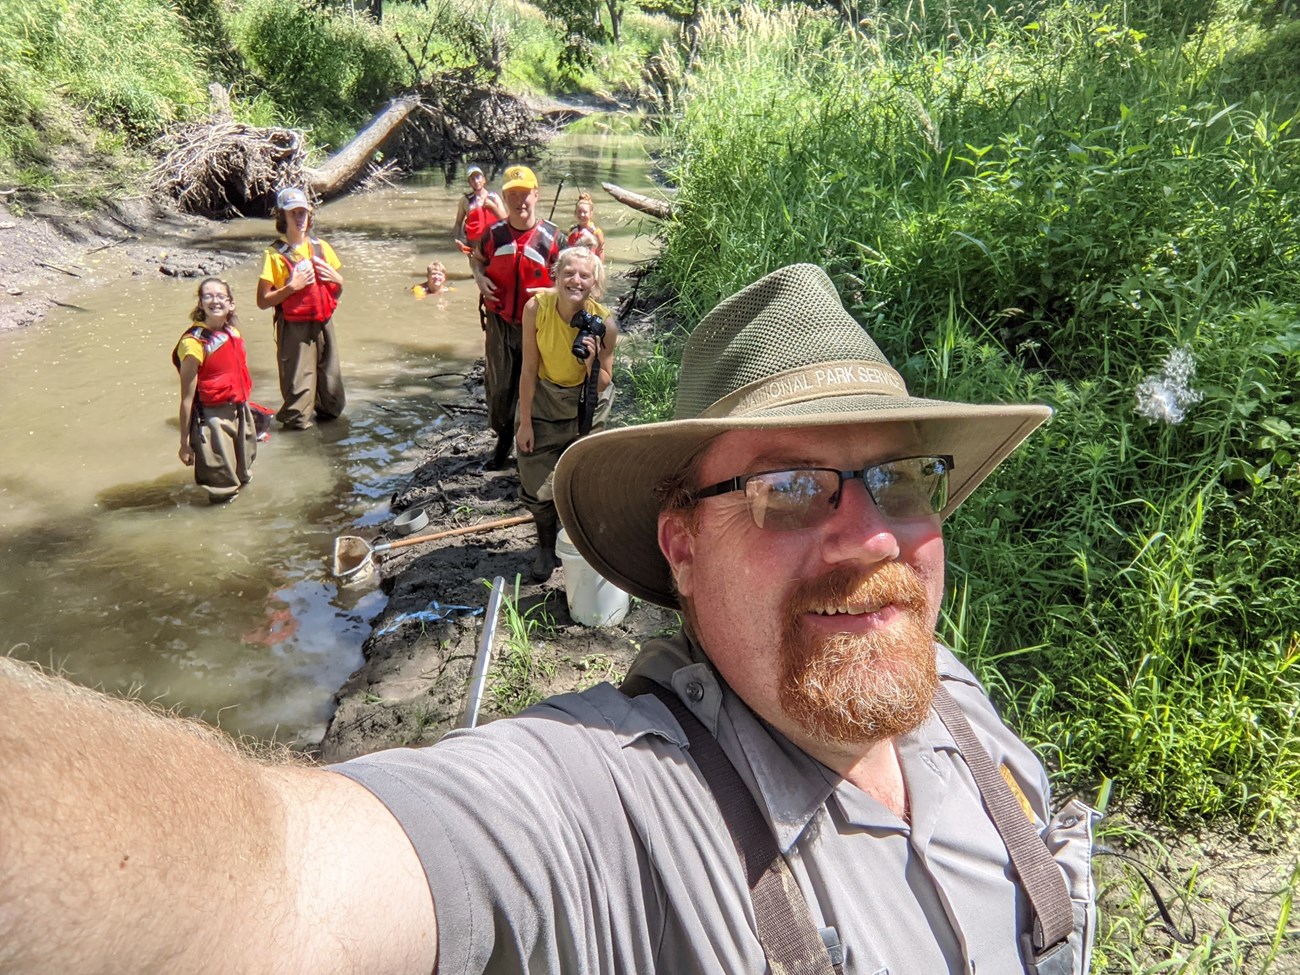 Jesse Bolli with 8 Youth Conservation Corp members in Cub Creek. A D-net and a Secchi tube are on the muddy bank. Green vegetation grows up the sides.